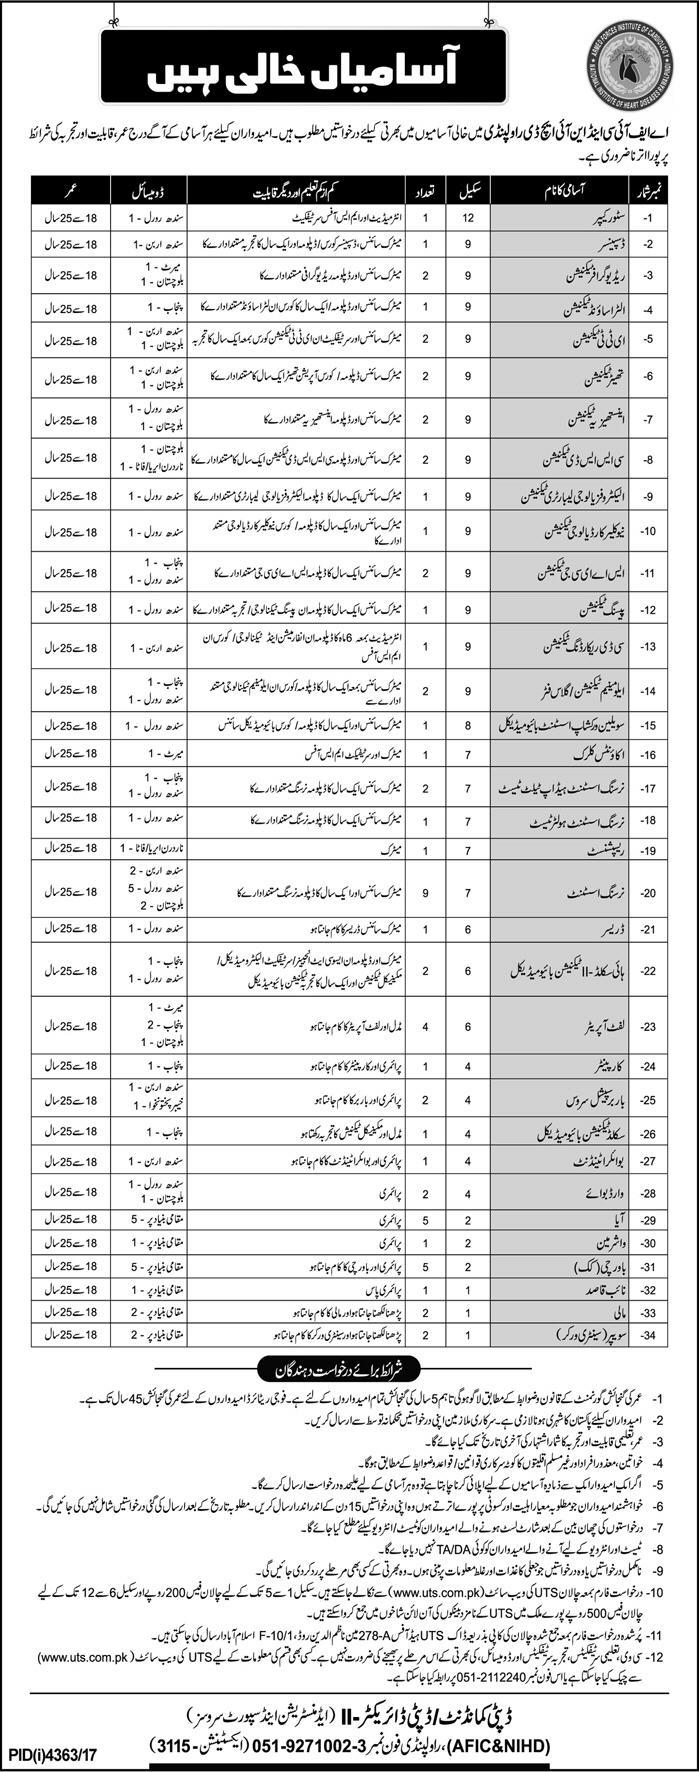 Rawalpindi Armed Forces Institute of Cardiology & NIHD 66 Jobs, 13th February 2018 Daily Express Newspaper